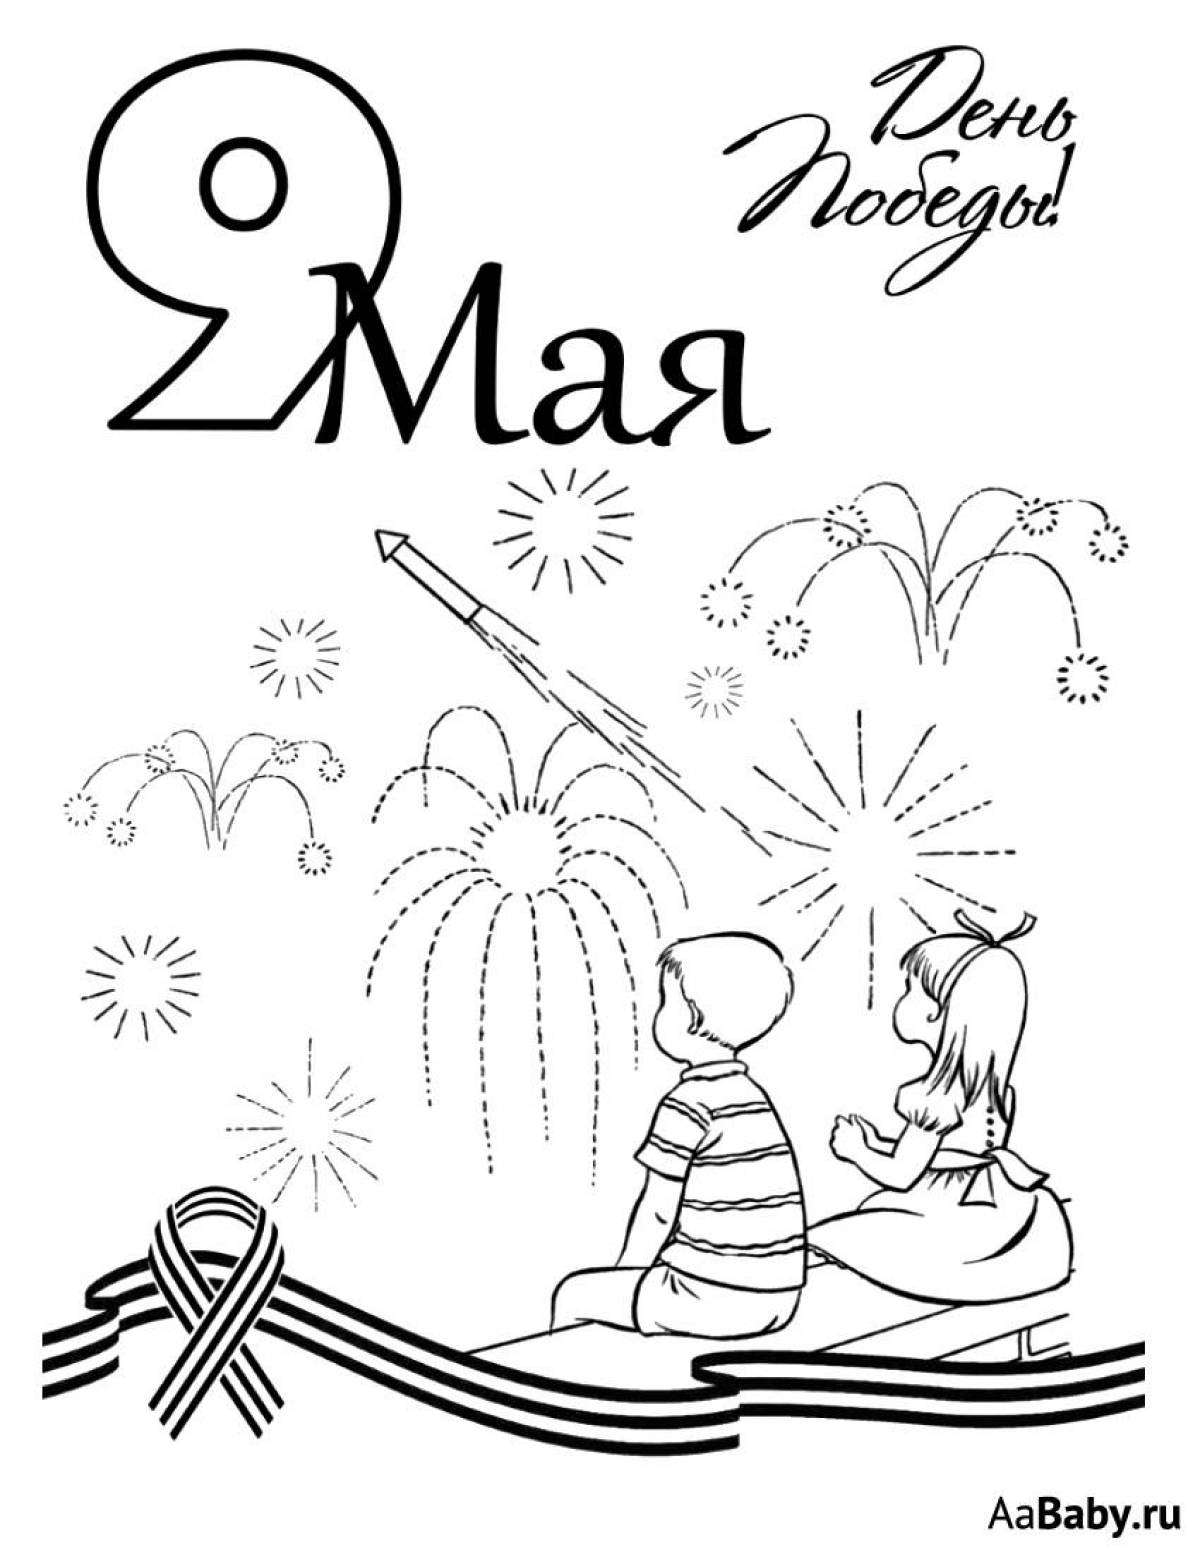 May 9 celebration coloring page